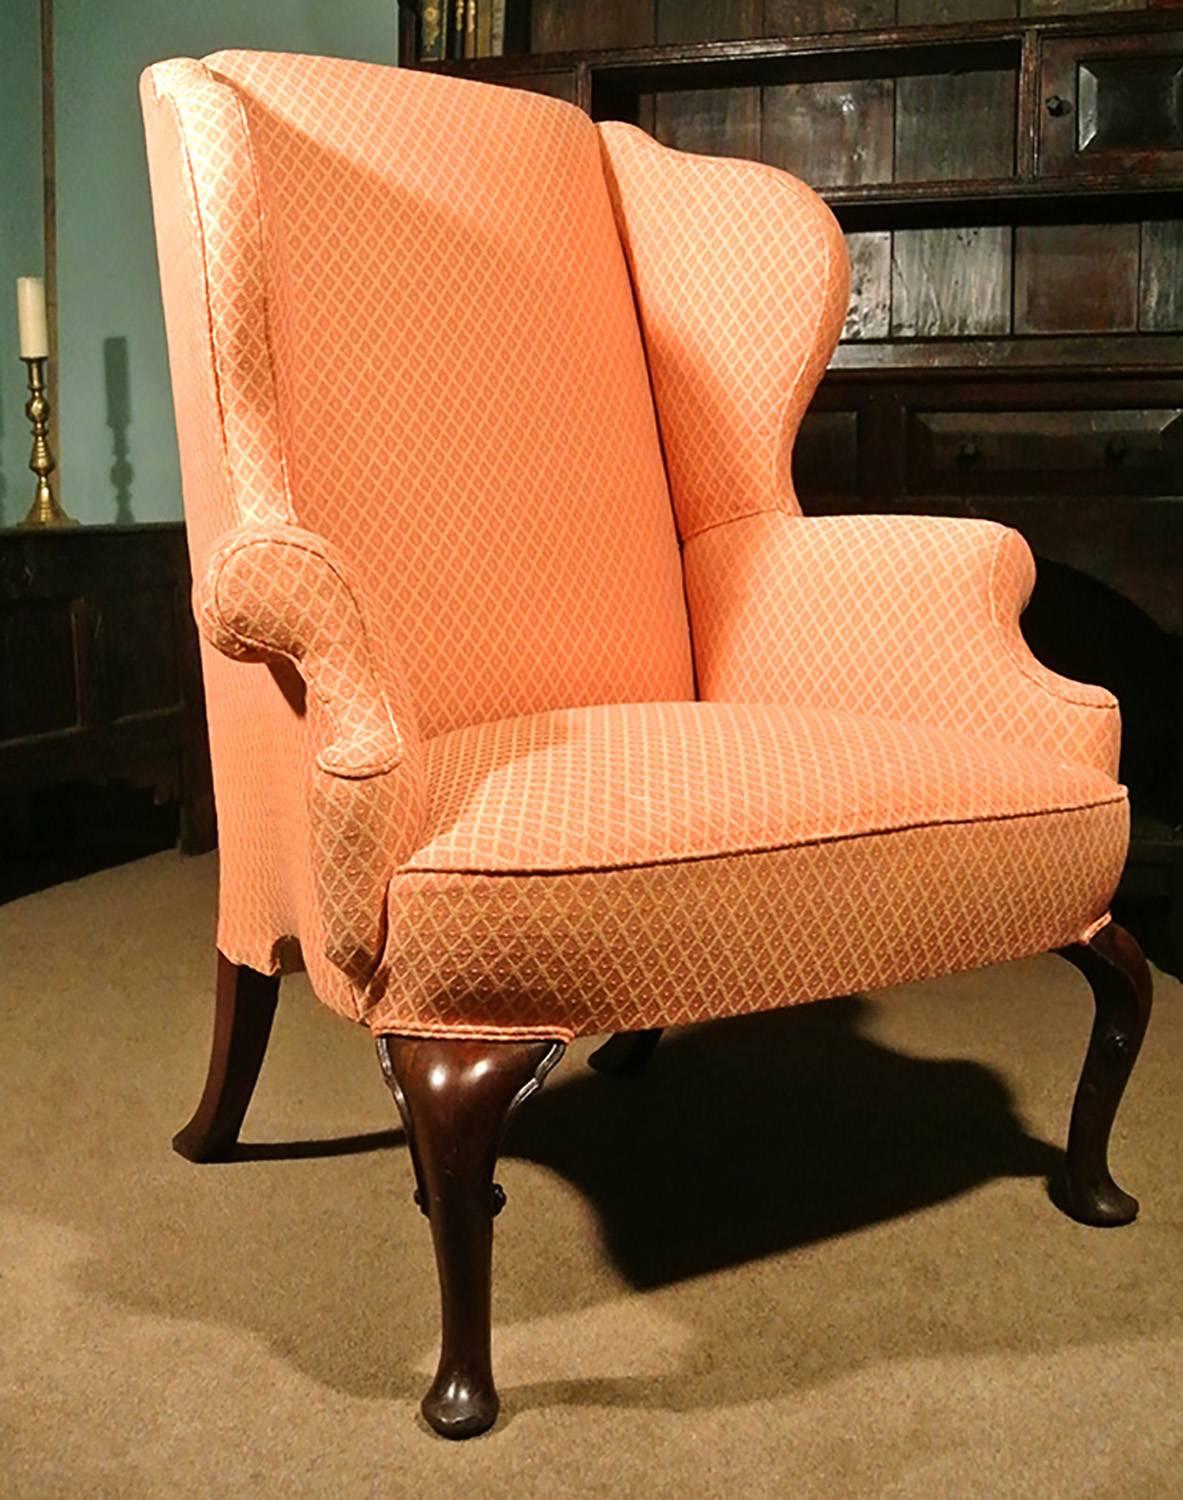 A lovely quality 18th century wing armchair circa 1780 with beautiful original mahogany frame in excellent condition and with a fabulous shape with outscrolled arms and shapely wings, a very comfortable rake to the back and recently upholstered in a